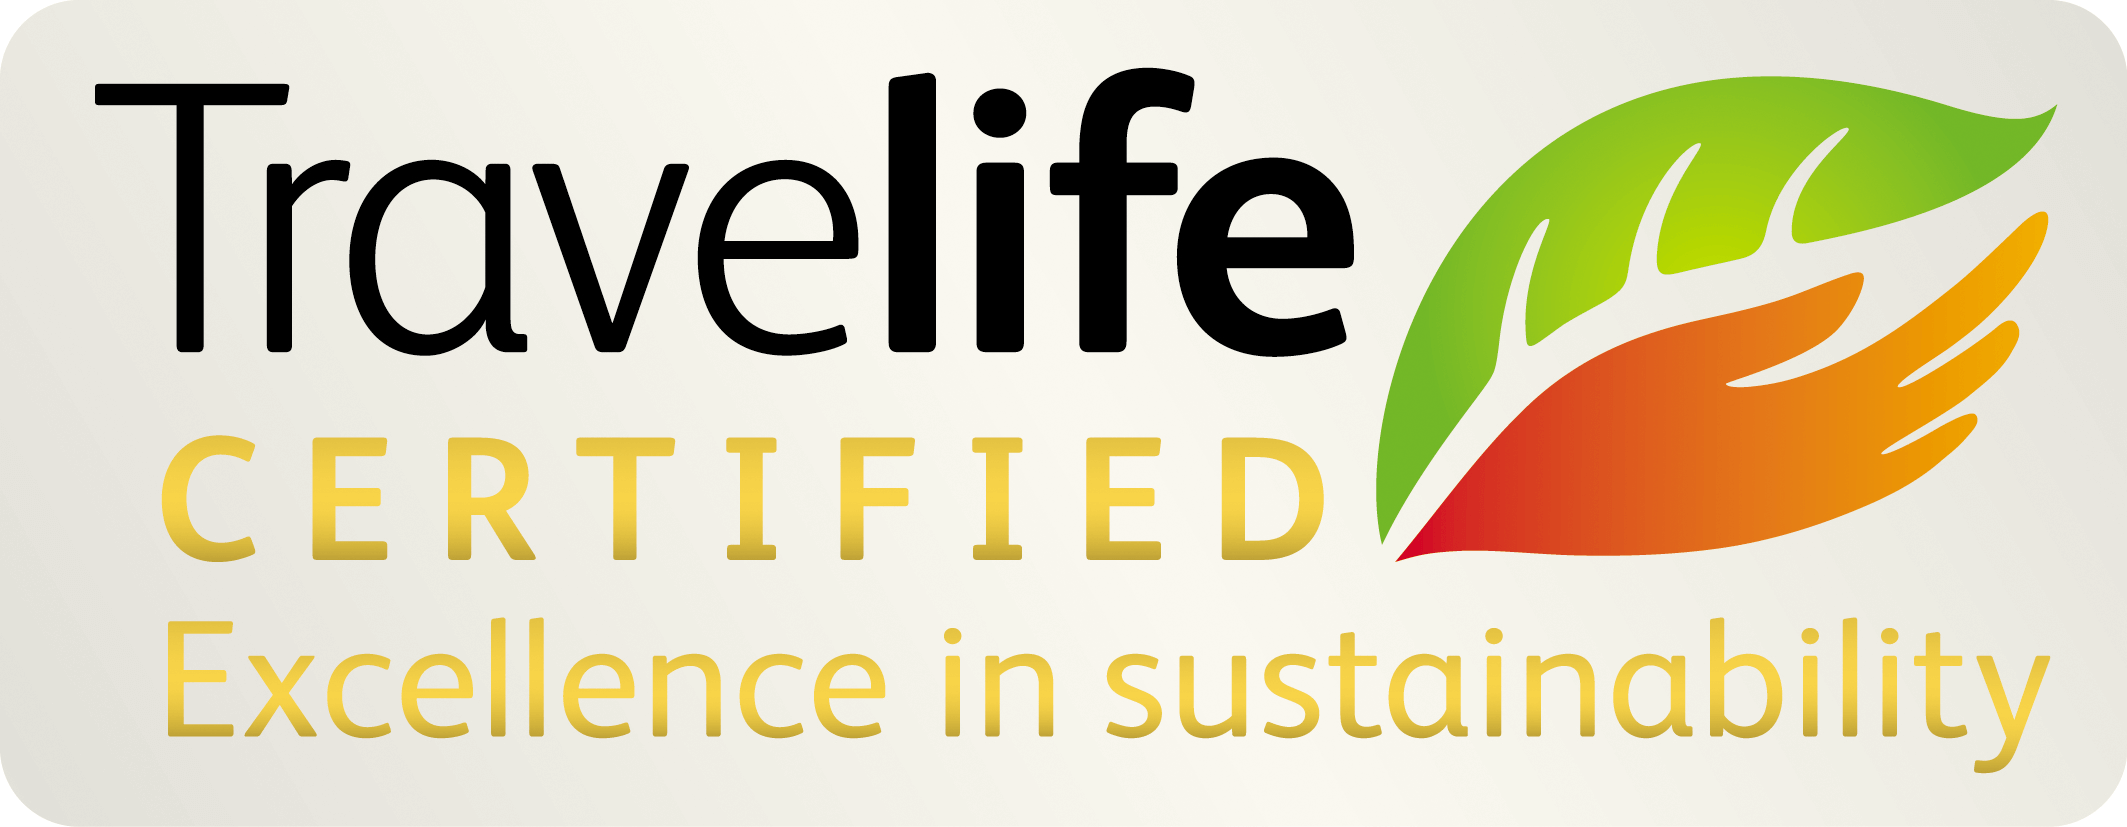 Travelife Certified, Excellence in sustainability